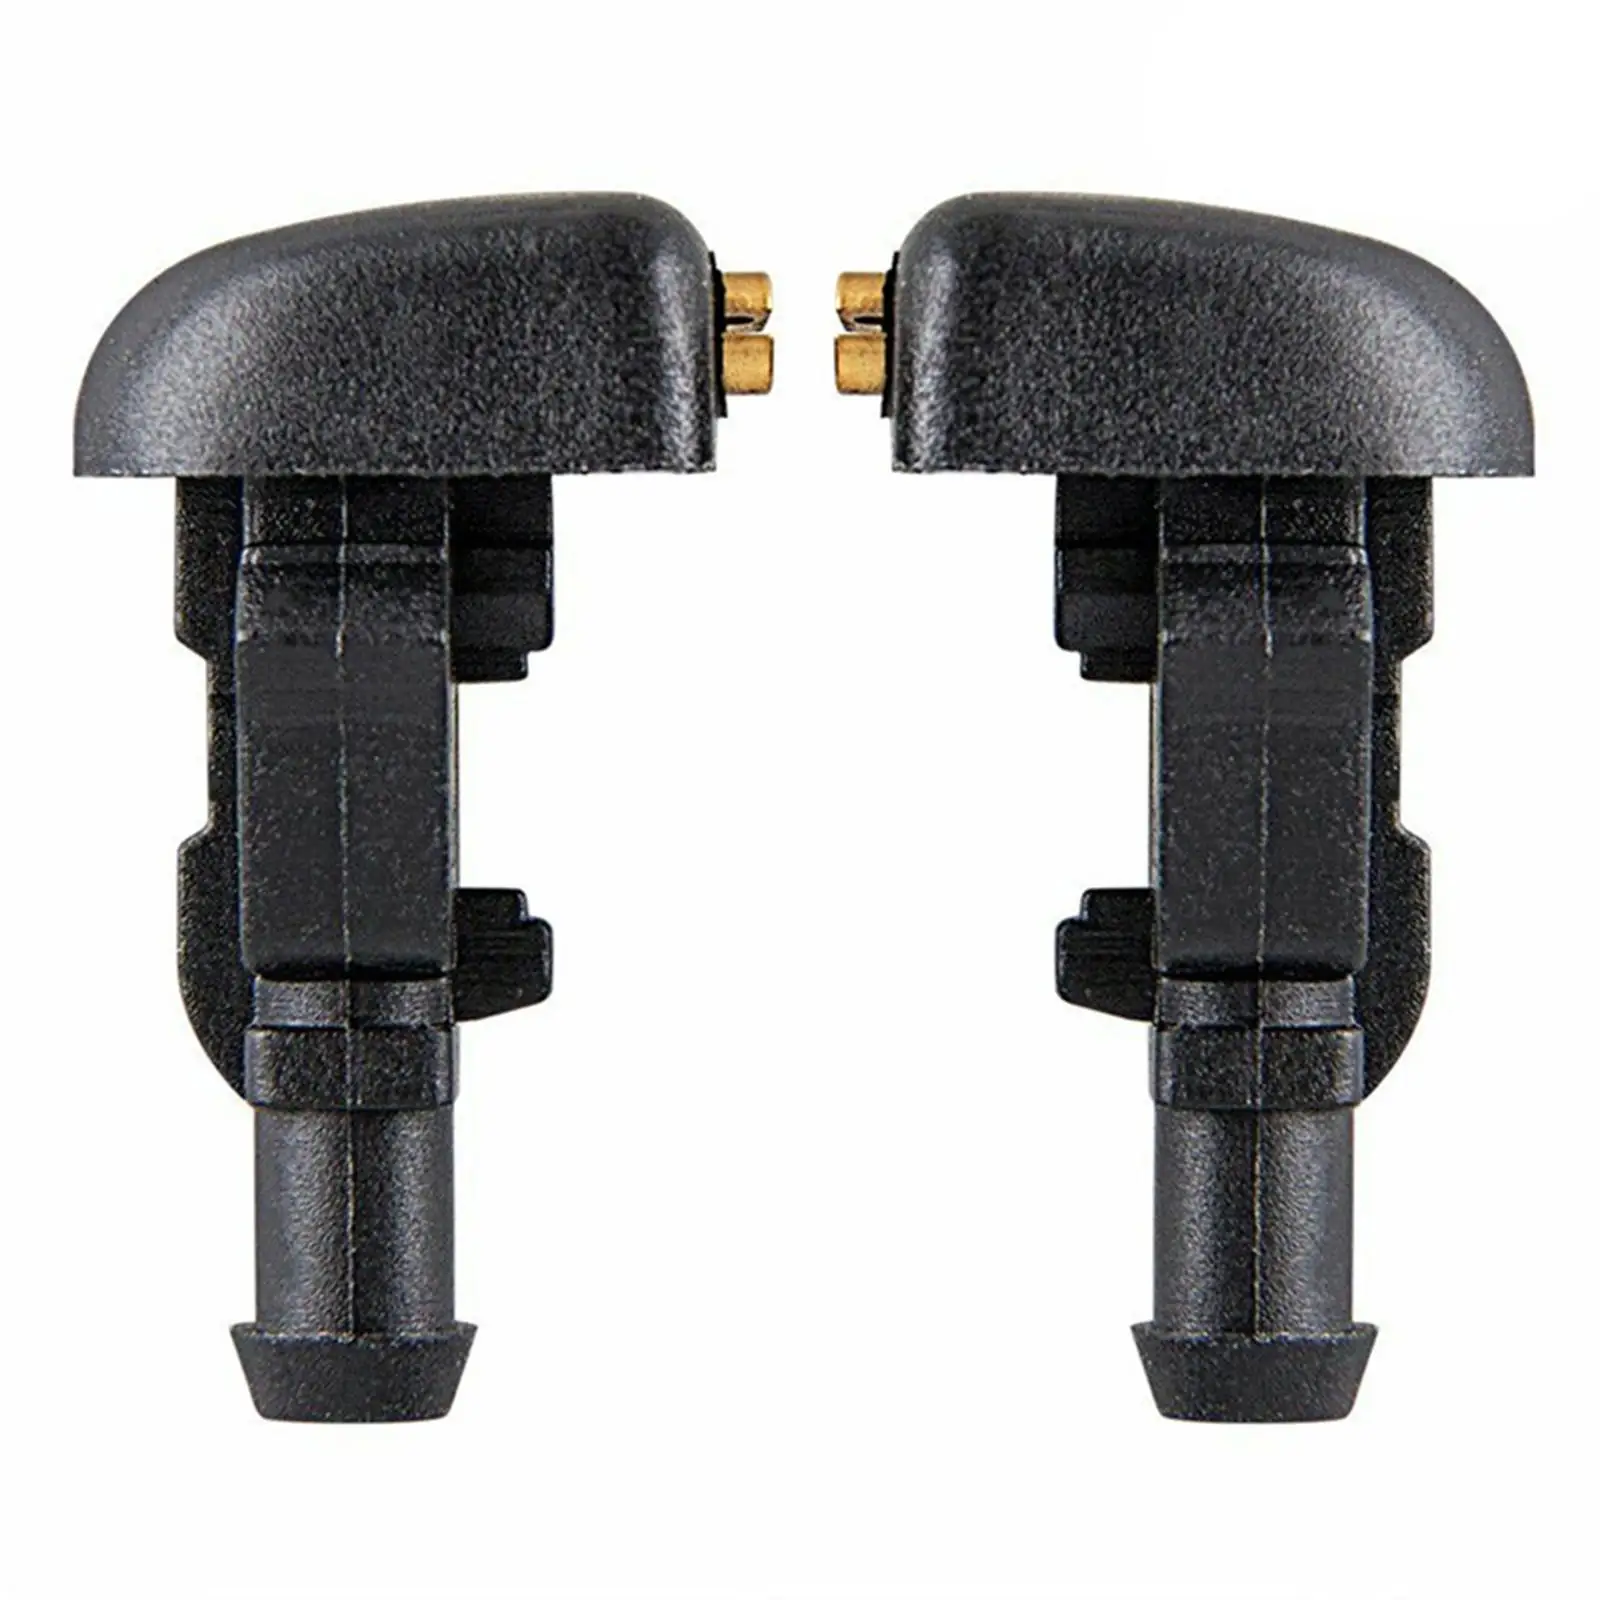 2Pcs Windshield Washer Nozzle Spray Jet Windshield Washer Nozzle for Ford F150 2004 -2014